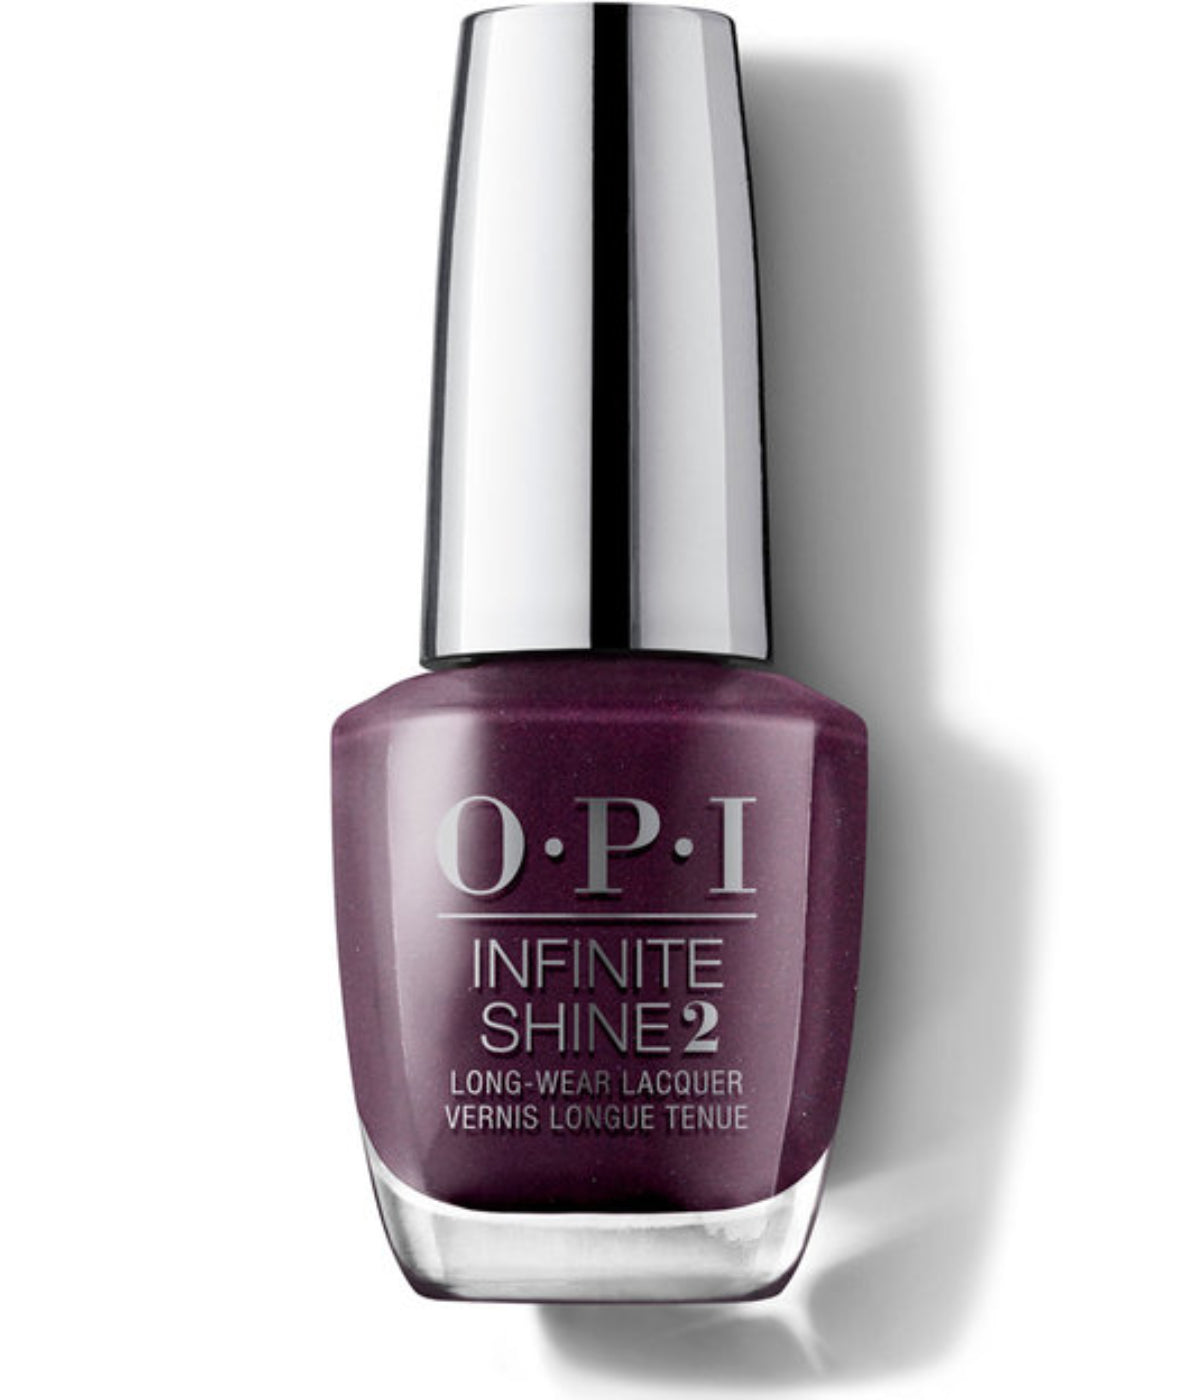 OPI Infinite Shine 2, Scotland Collection, Boys Be Thistle-ing at Me, 15mL